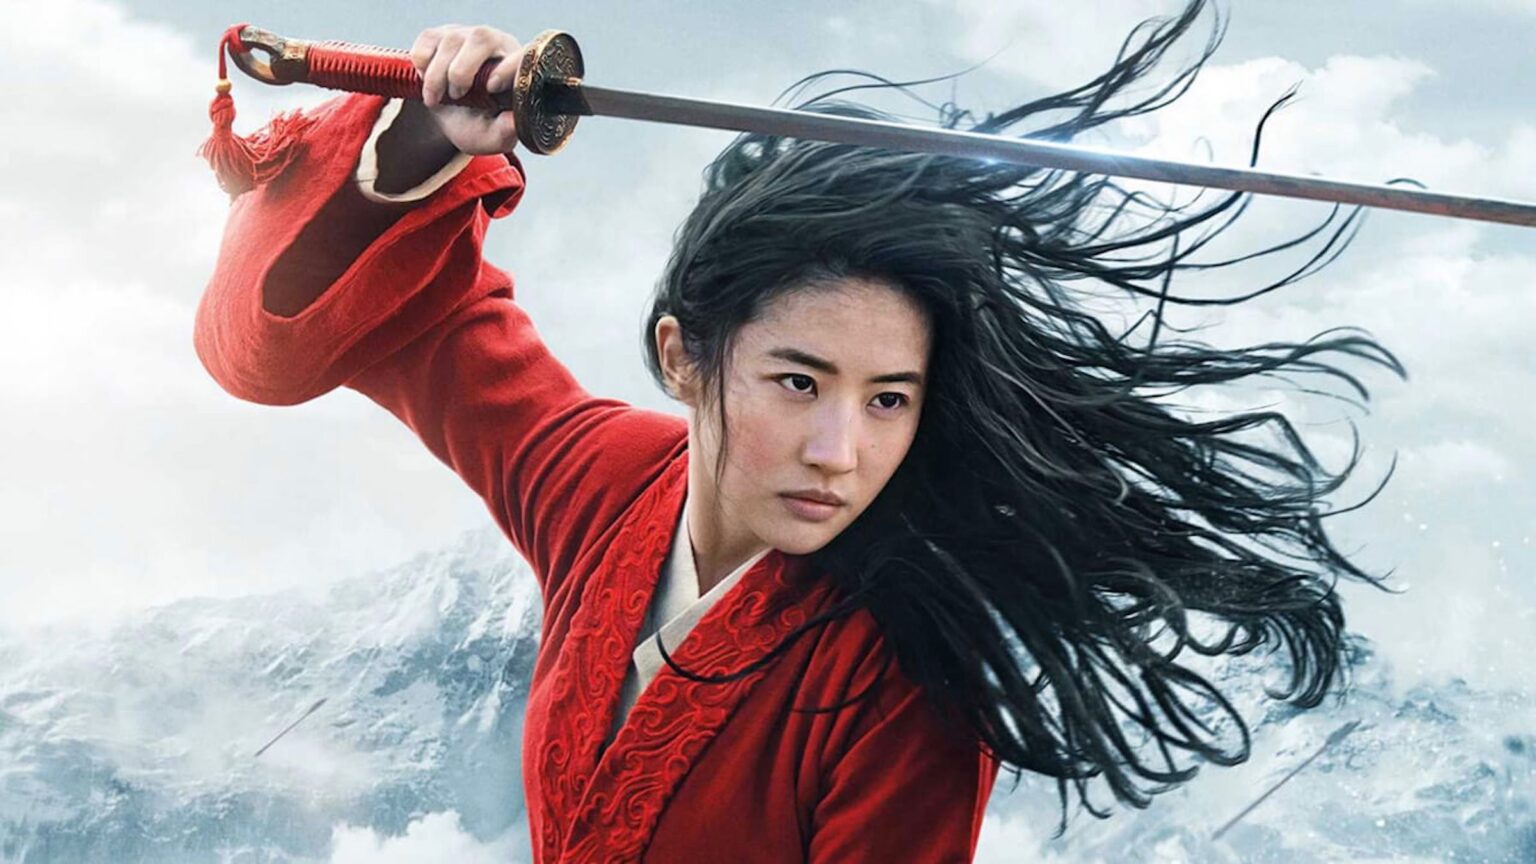 'Mulan' has already received positive reviews from critics. Here's what we know about the release and why Liu Yifei was the best fit.